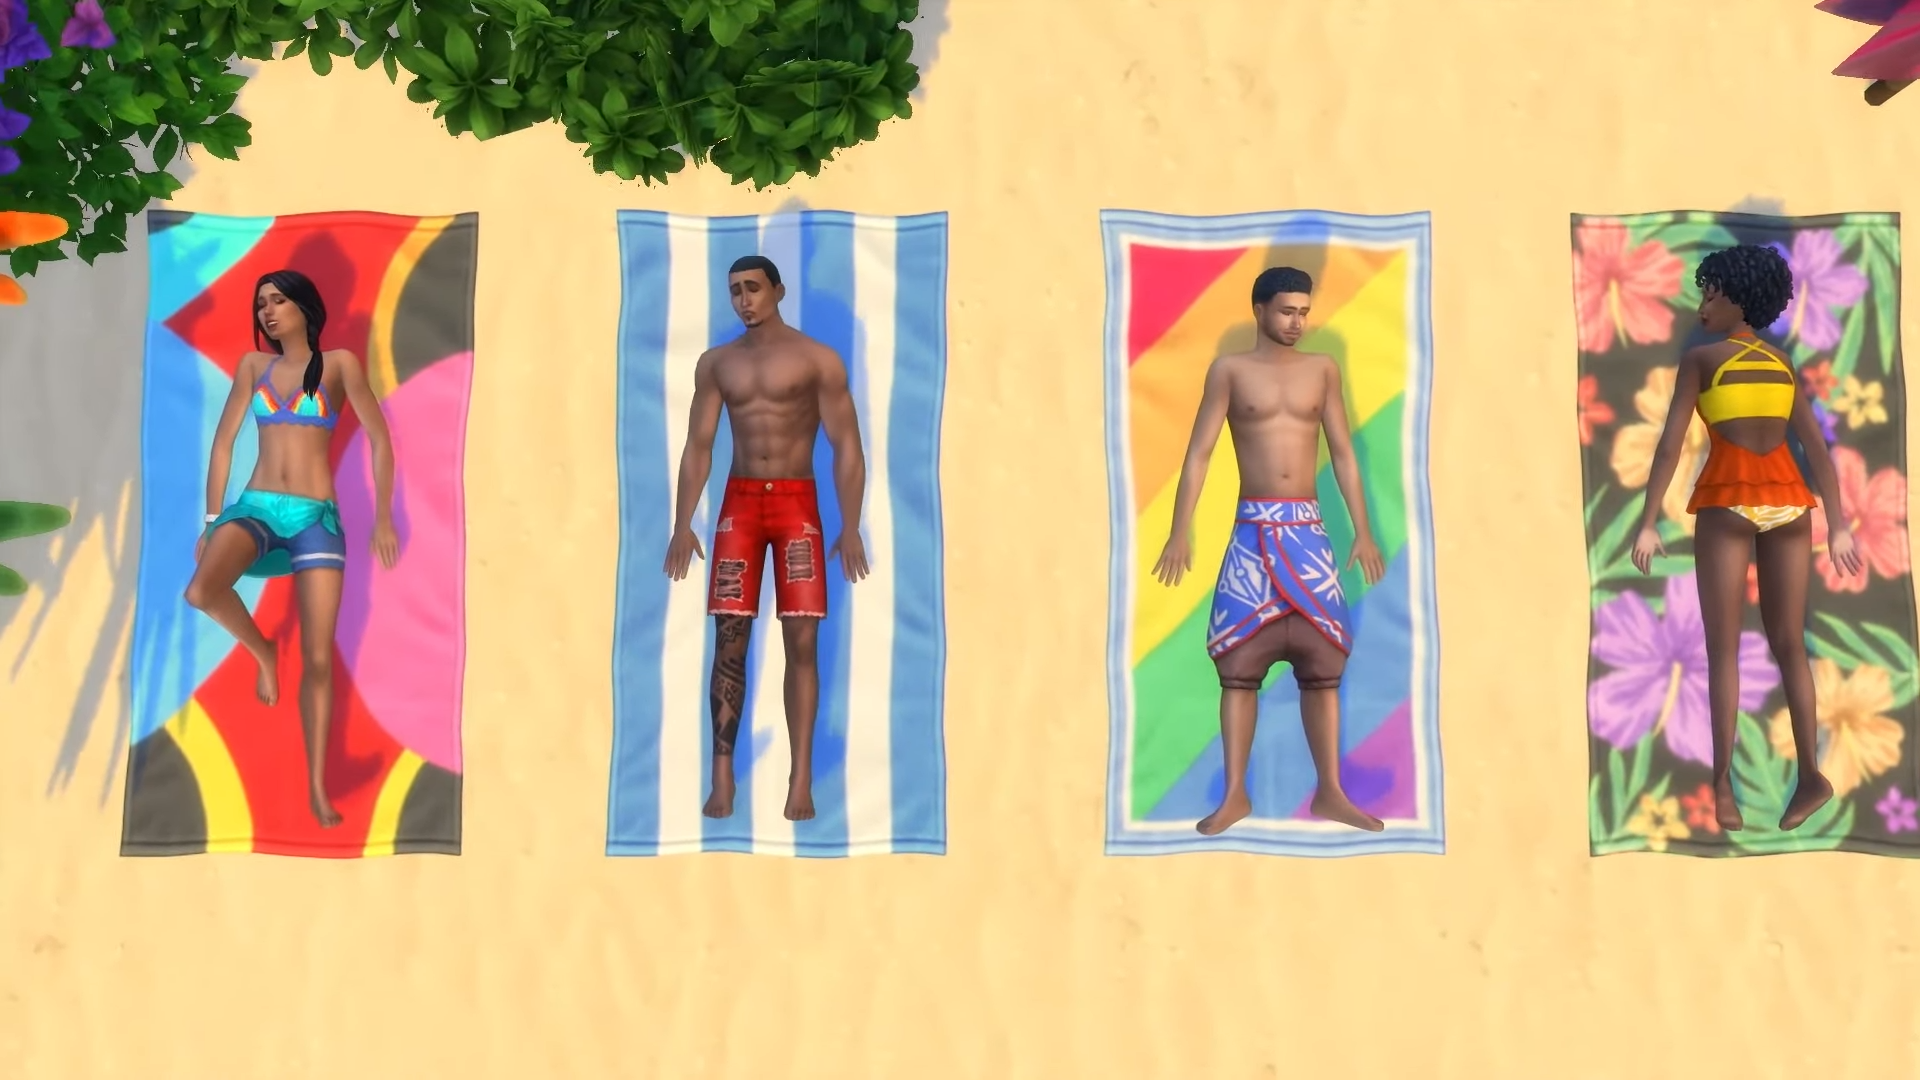 the sims 4 island living